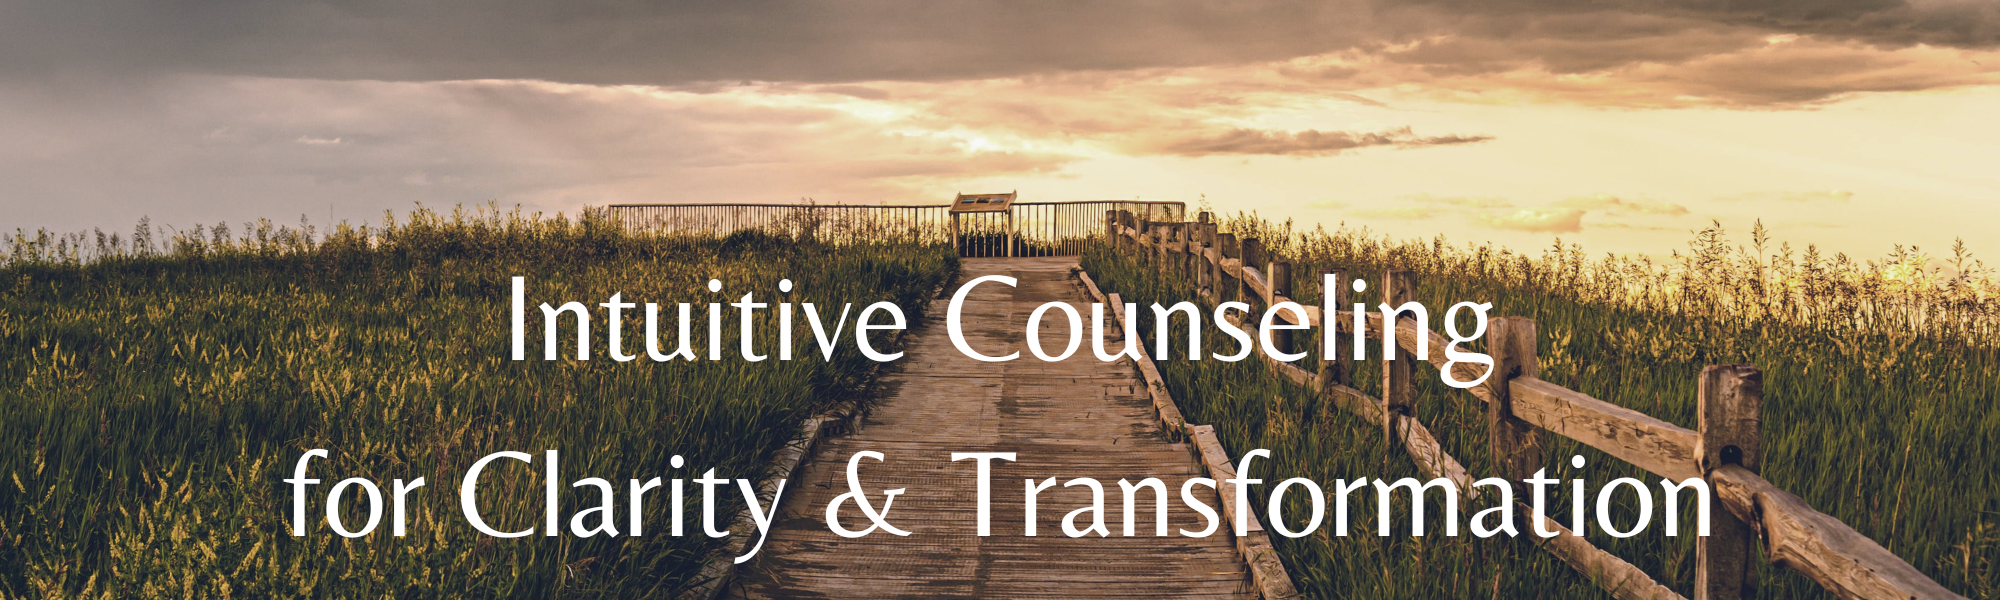 Intuitive Counseling for Clarity & Transformation